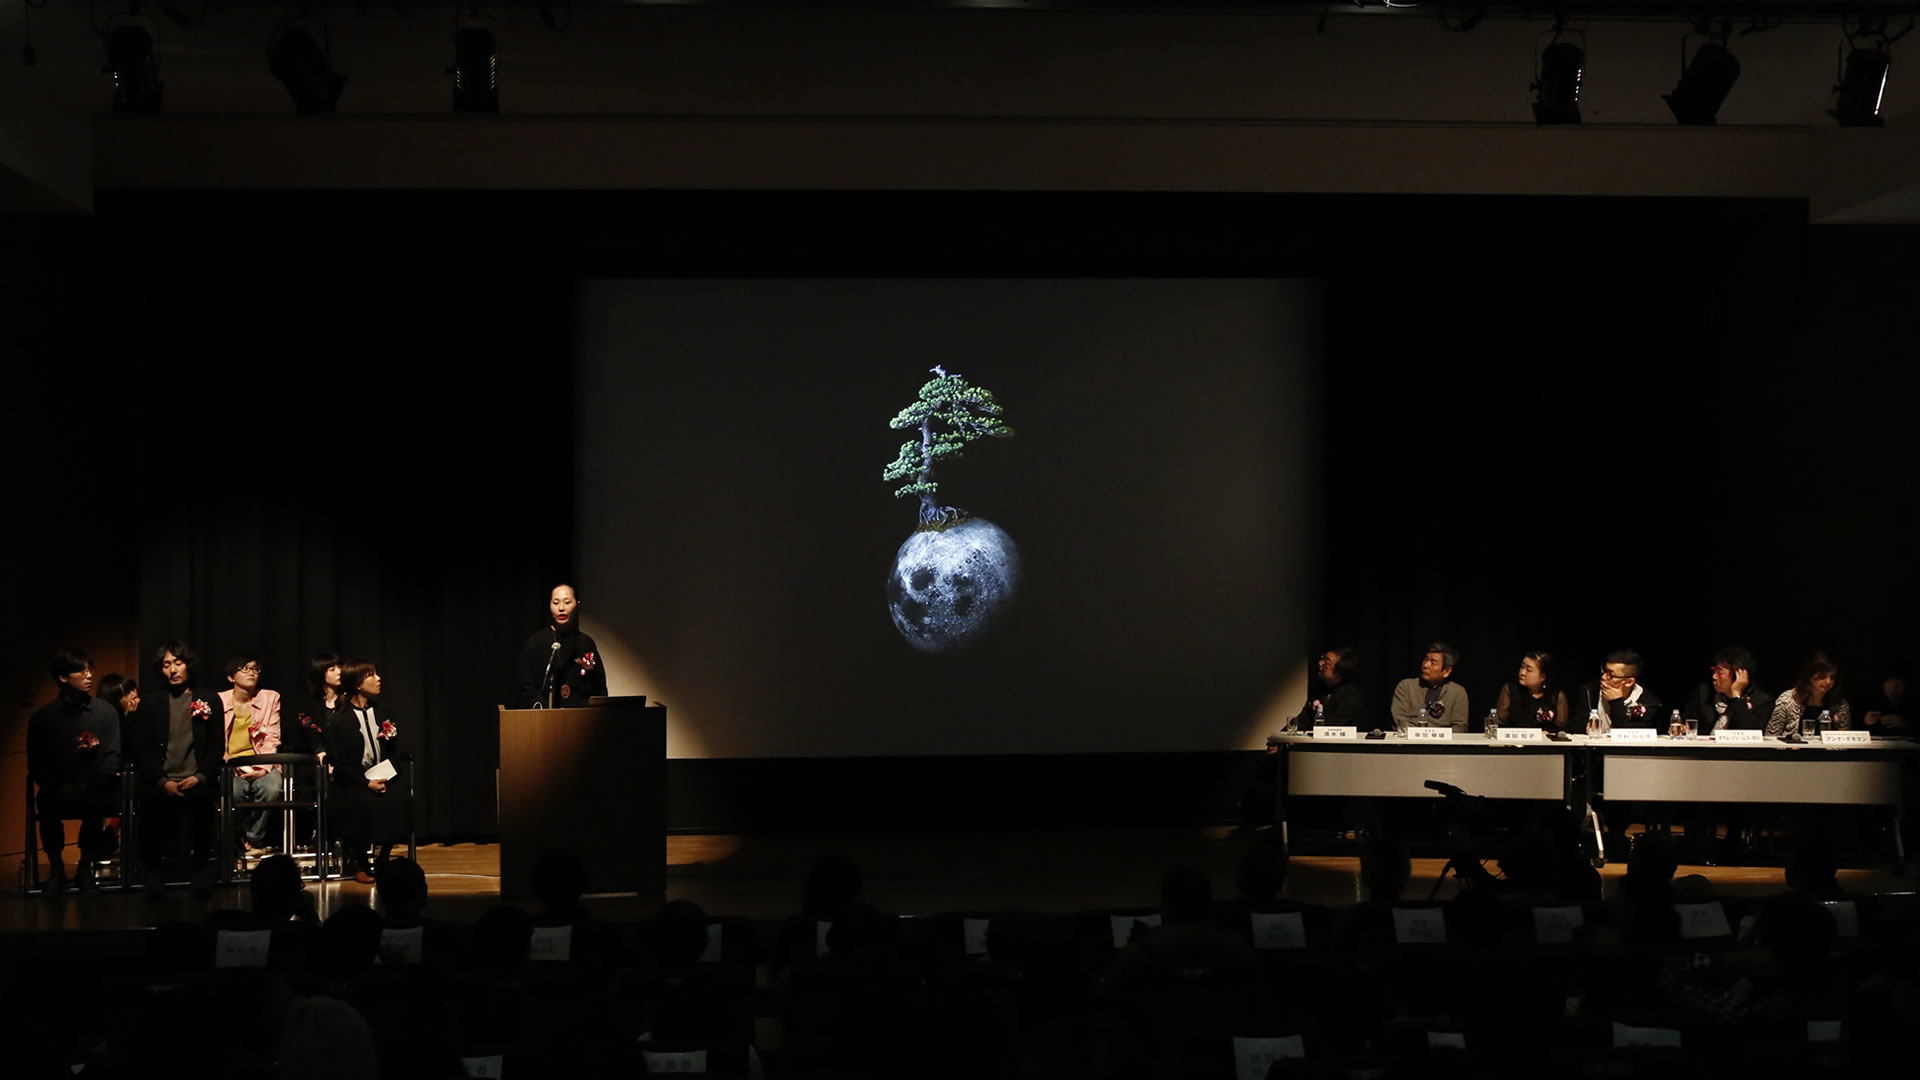 Report on the Public Grand Prize Selection Meeting for the 2016 New Cosmos of Photography (39th Edition)